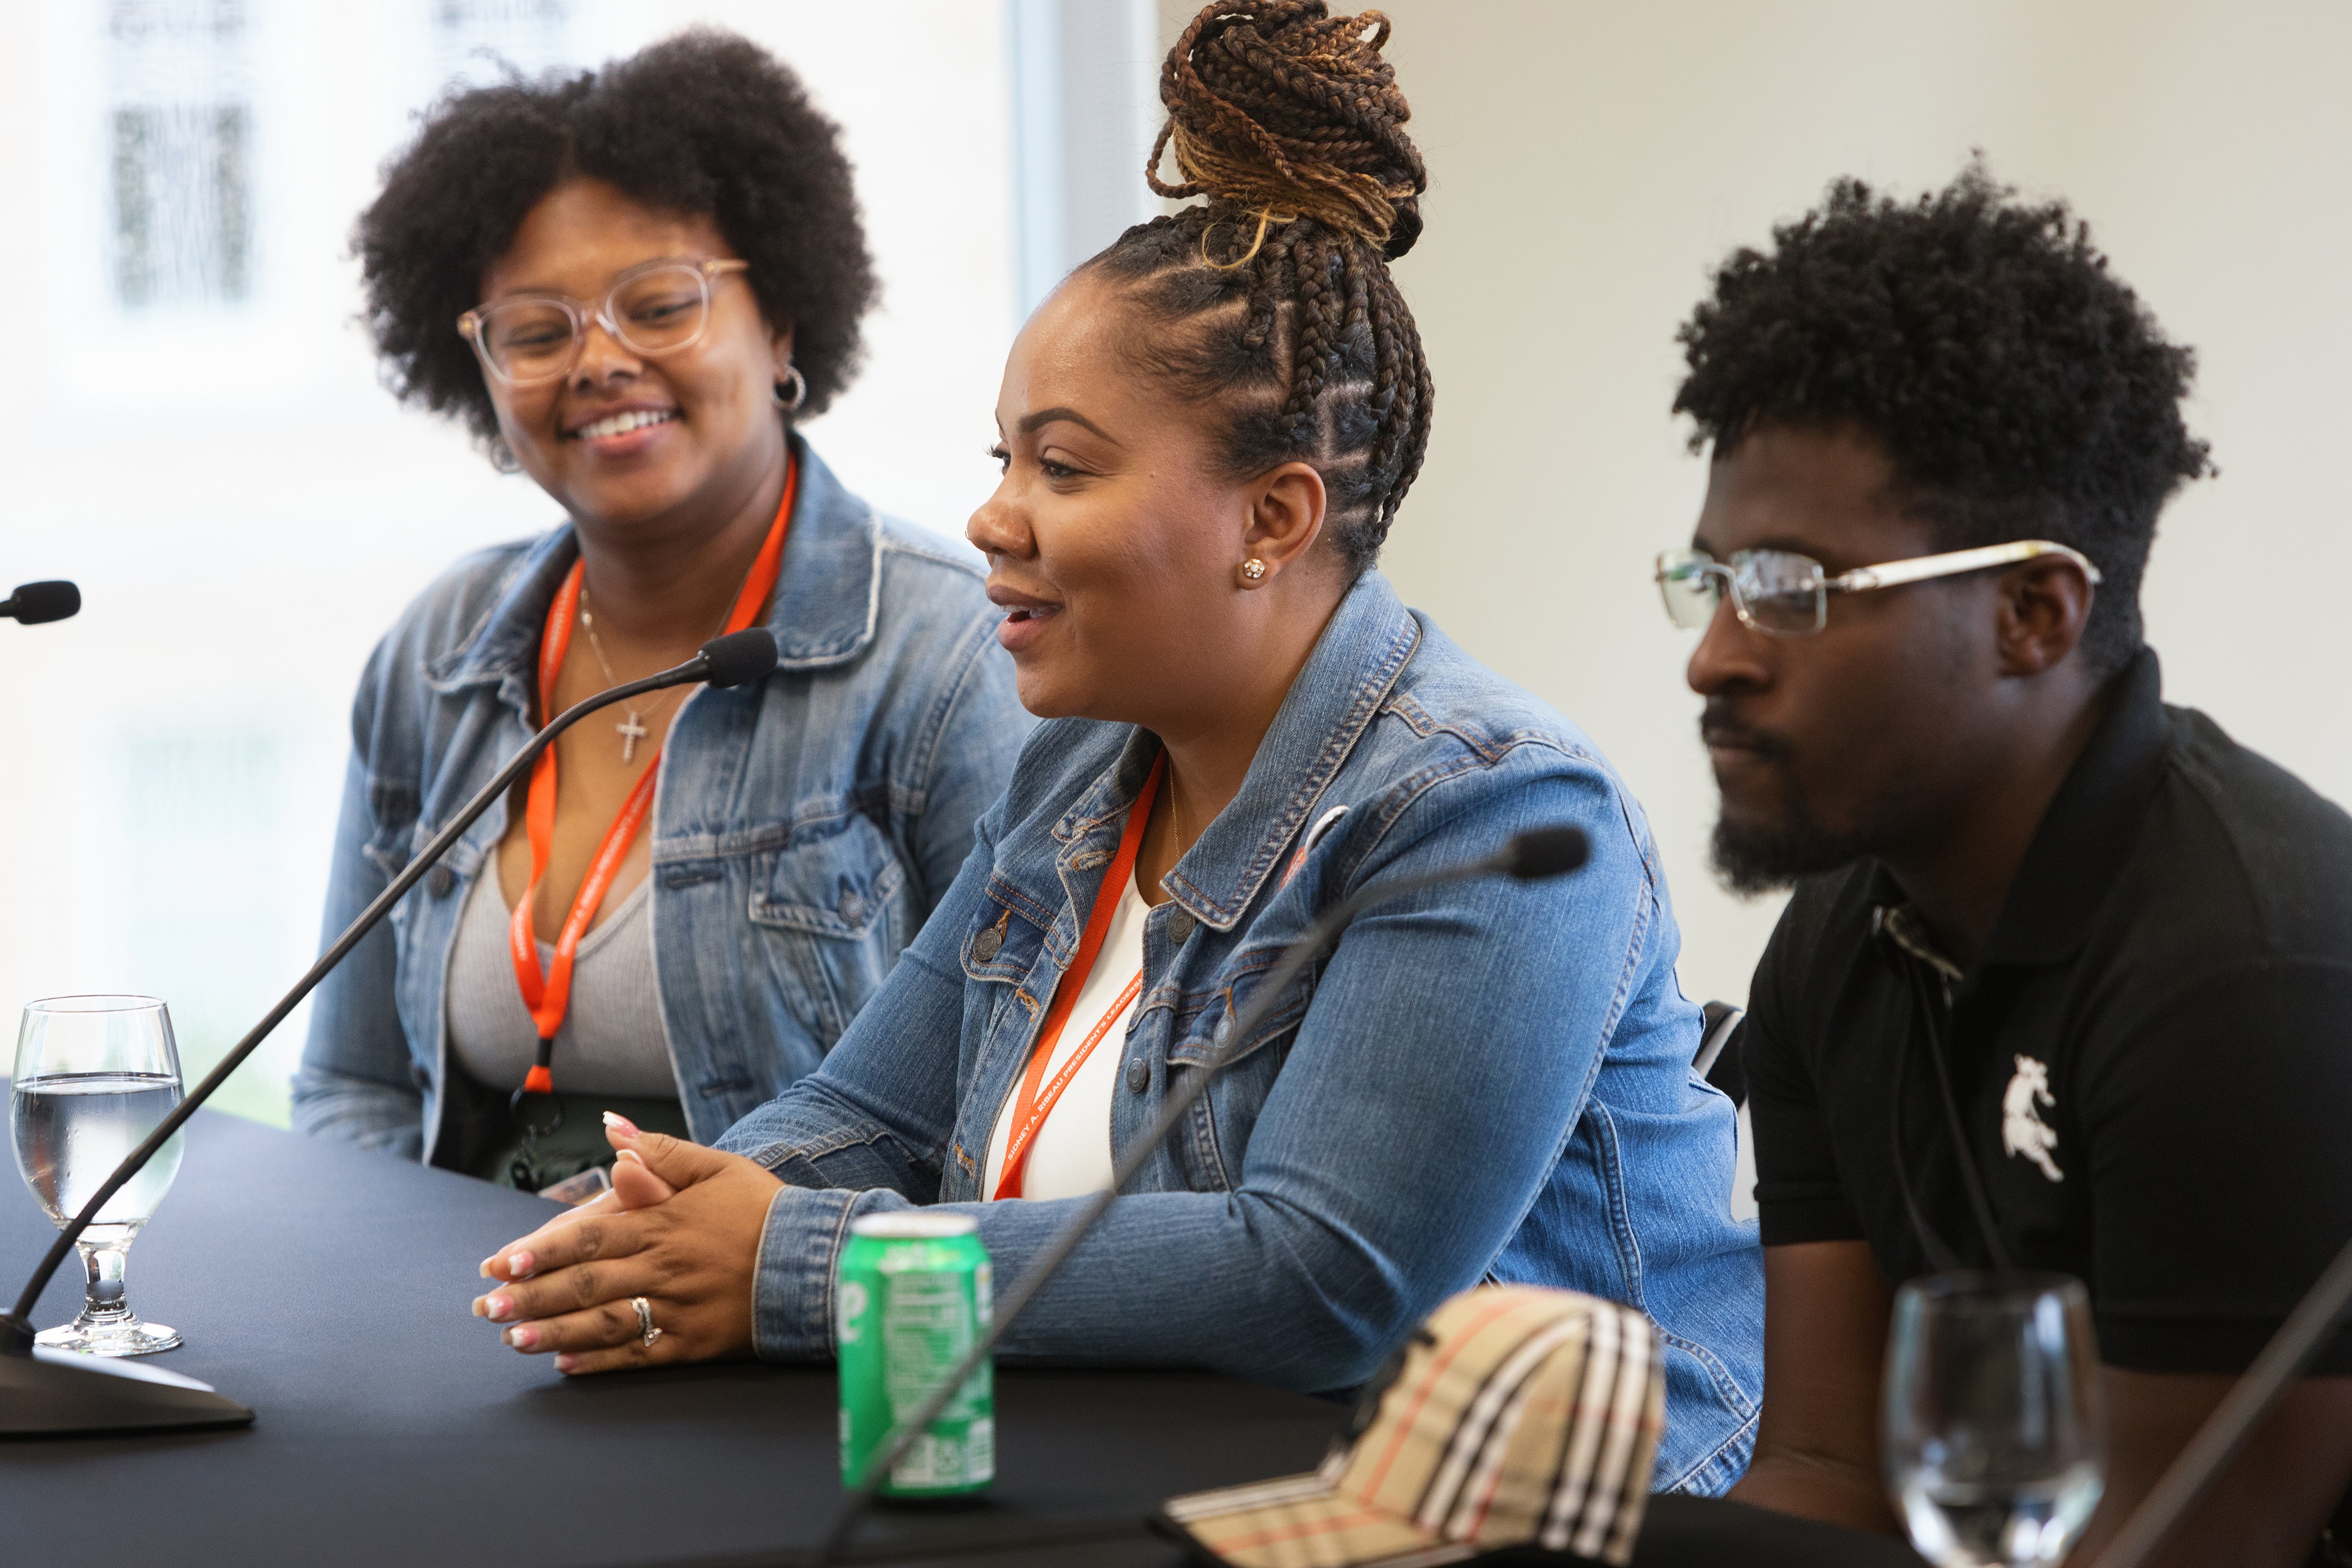 President's Leadership Academy alumni lead a discussion during the leadership symposium taking place in the Bowen-Thompson Student Union. (BGSU photo)